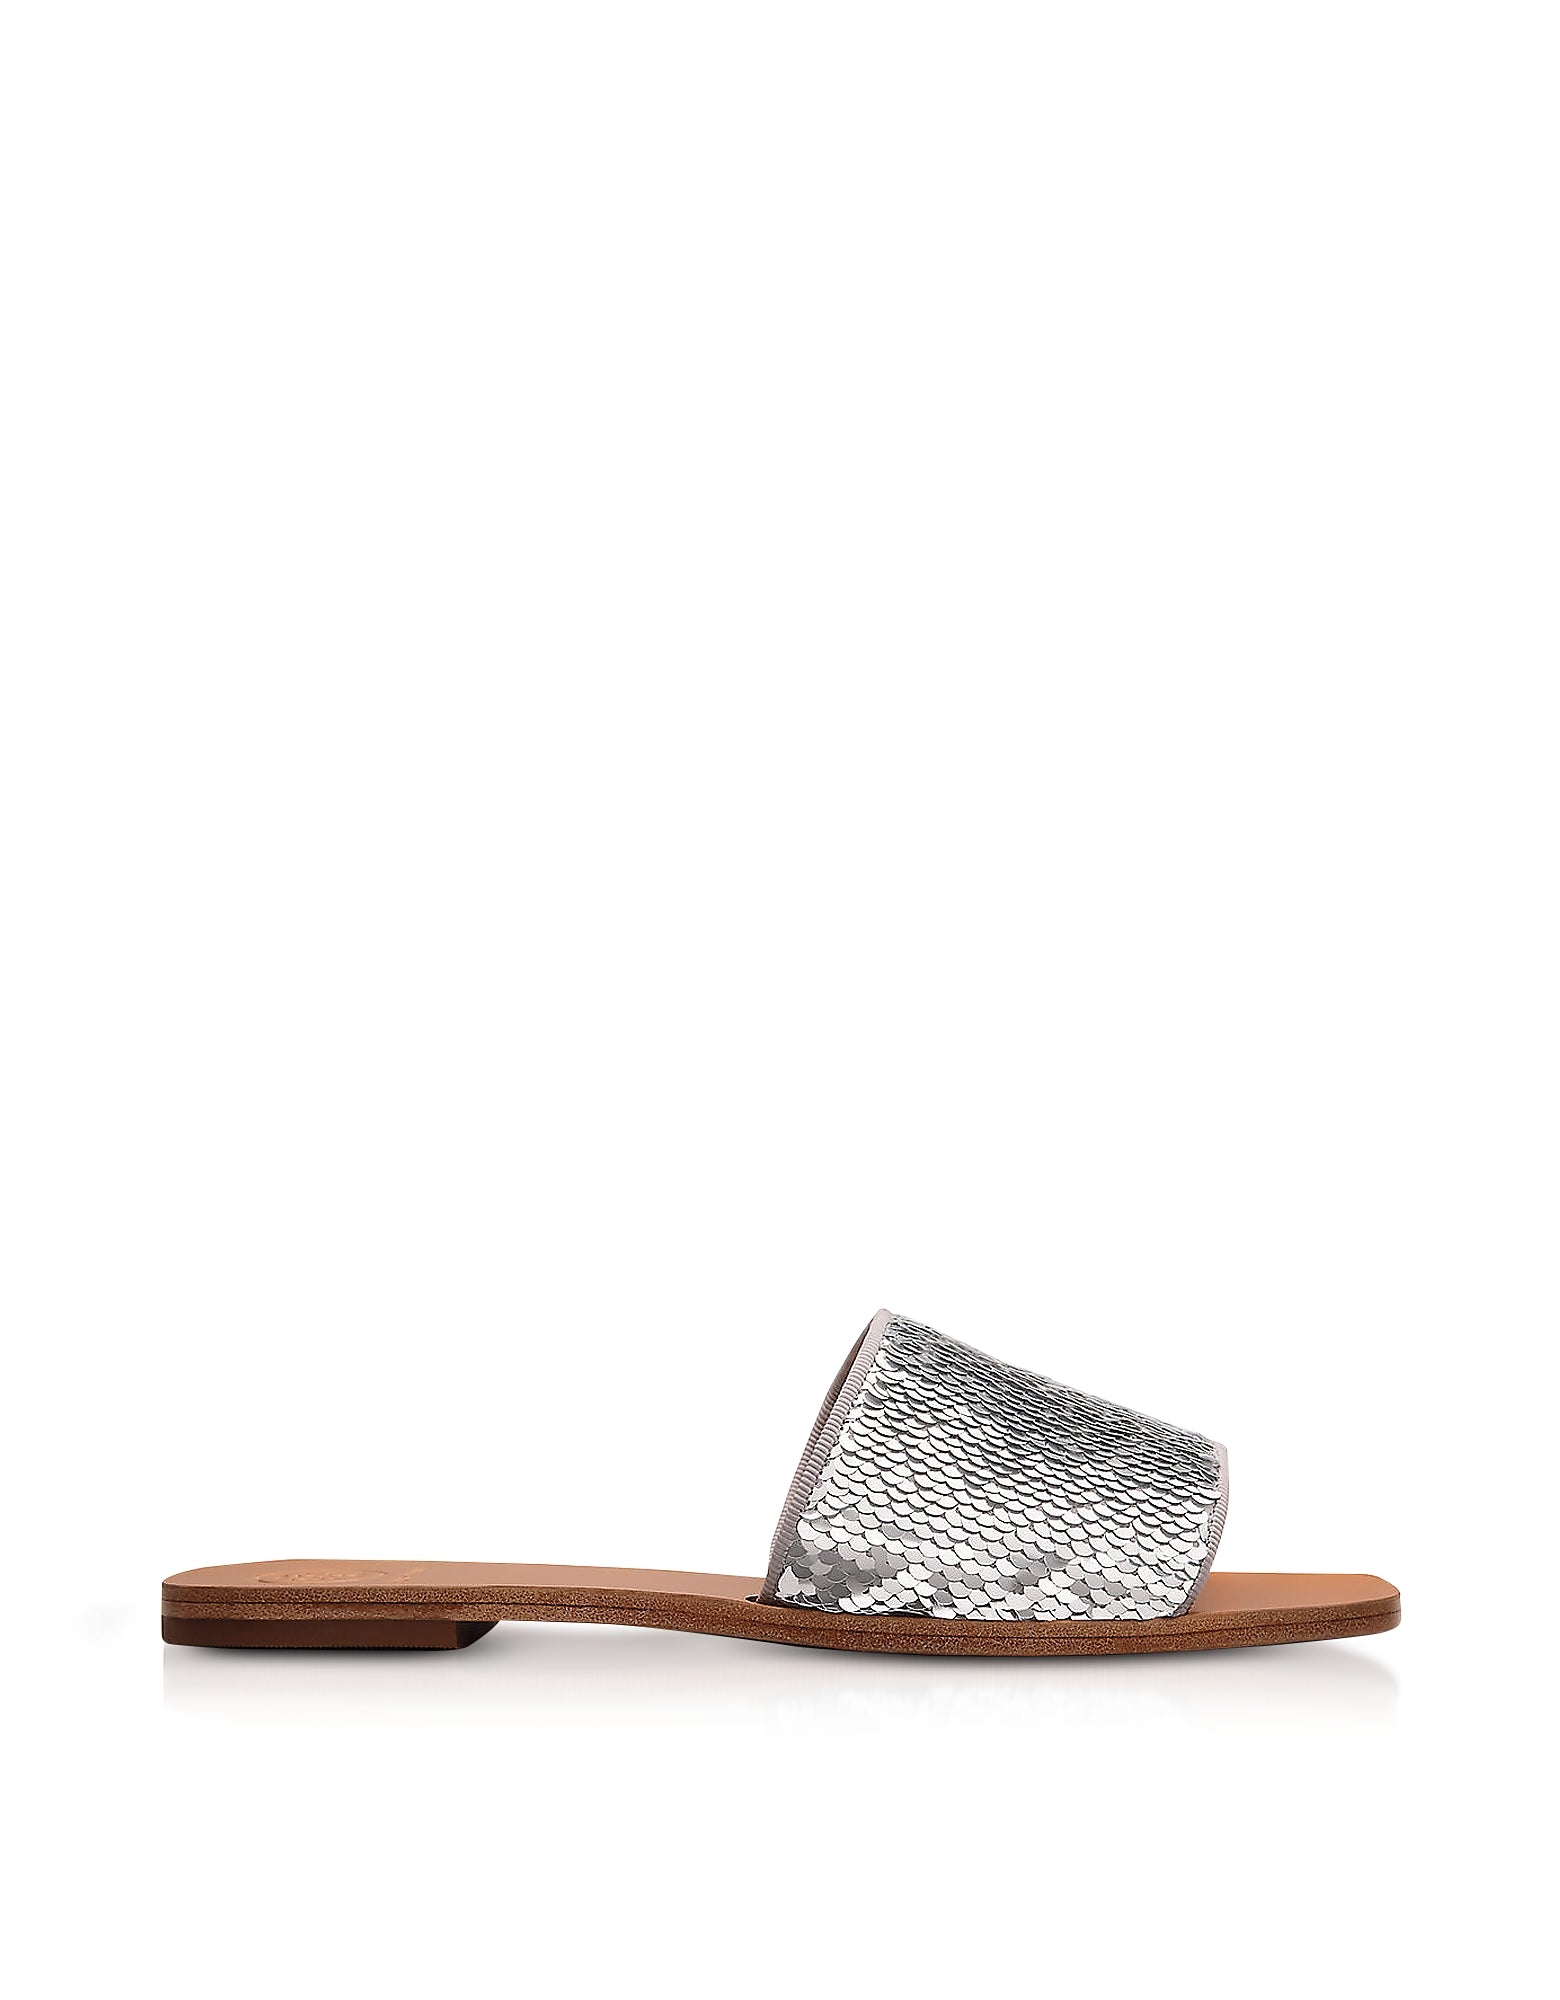 Carter Silver and White Glitter & Leather Slides by Tory Burch